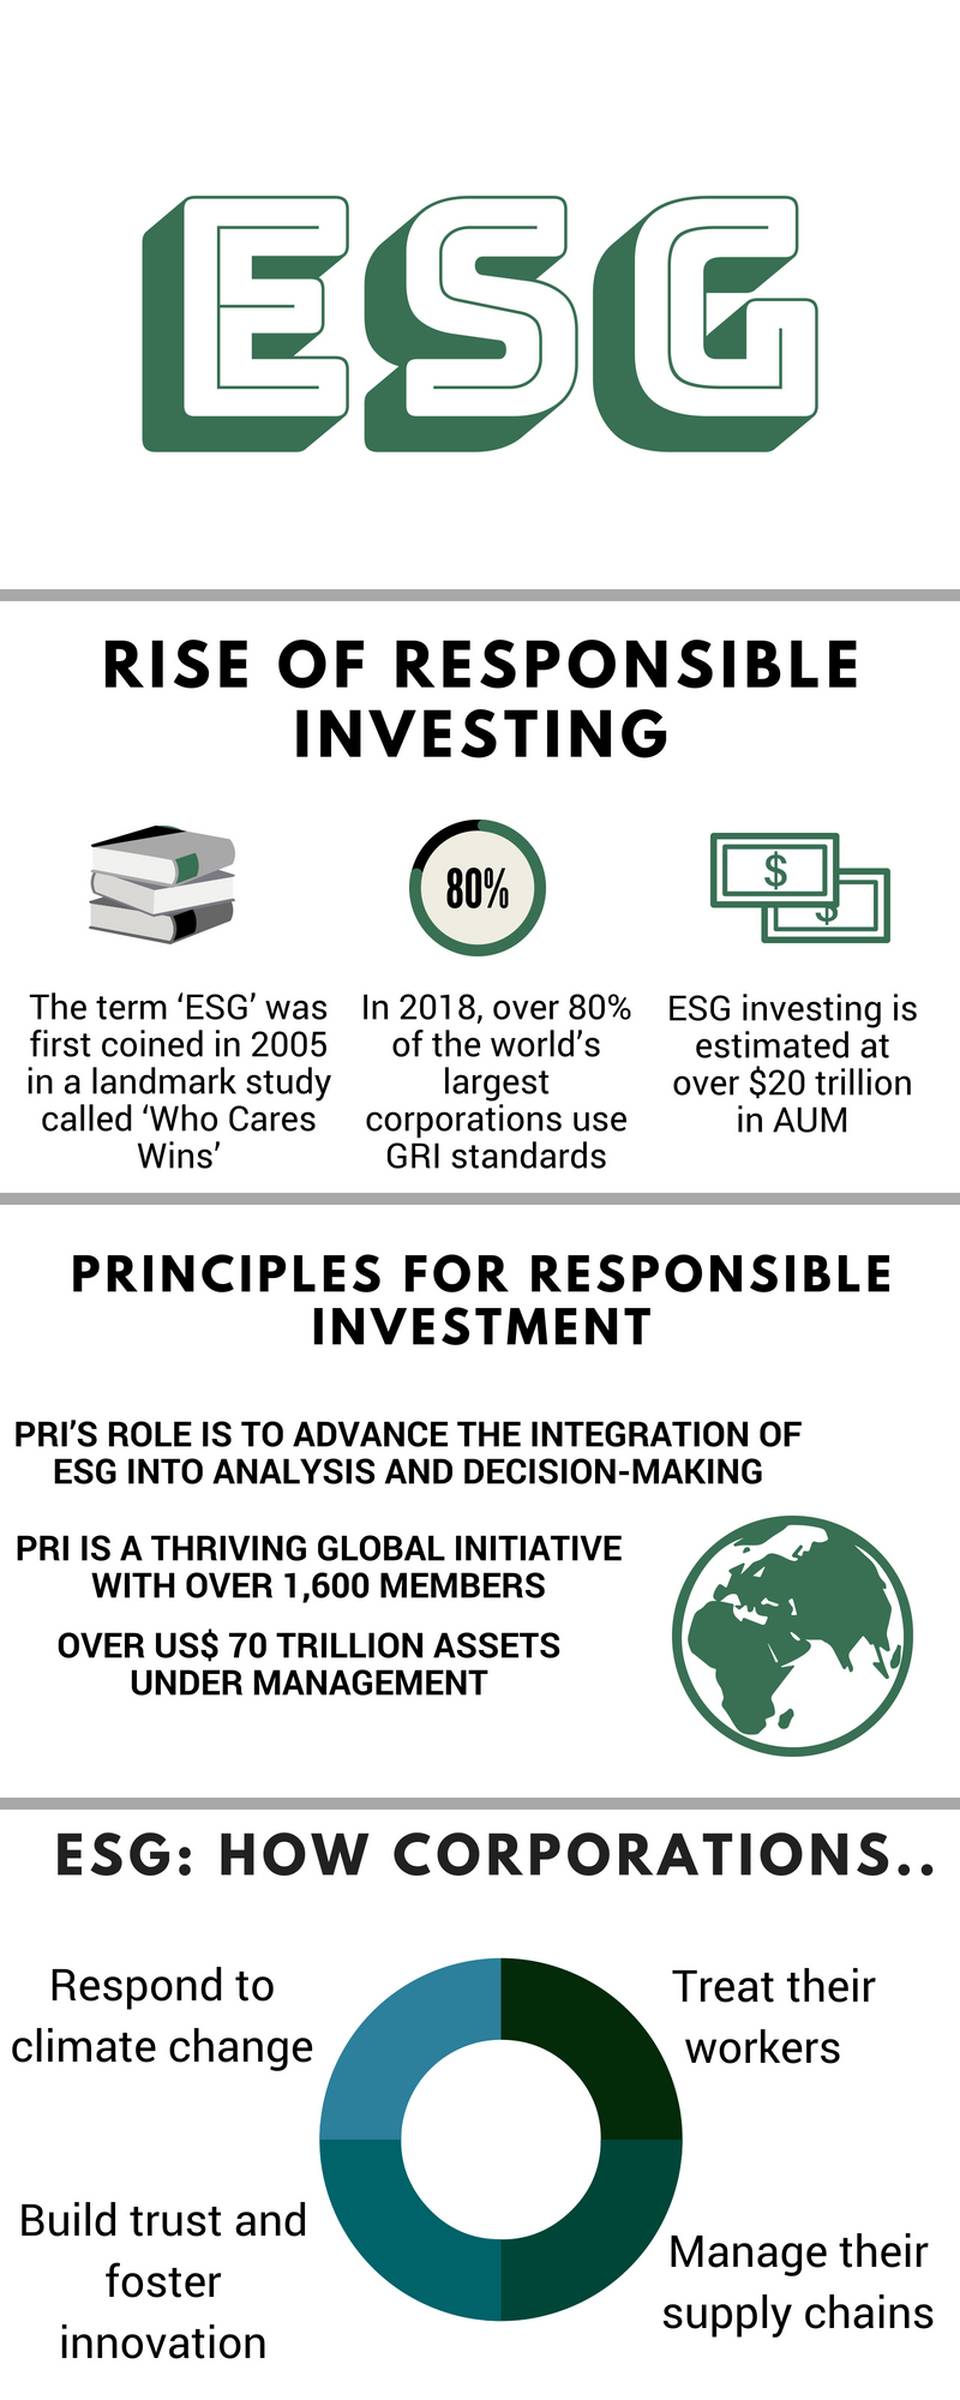 The Rise of Responsible Investing